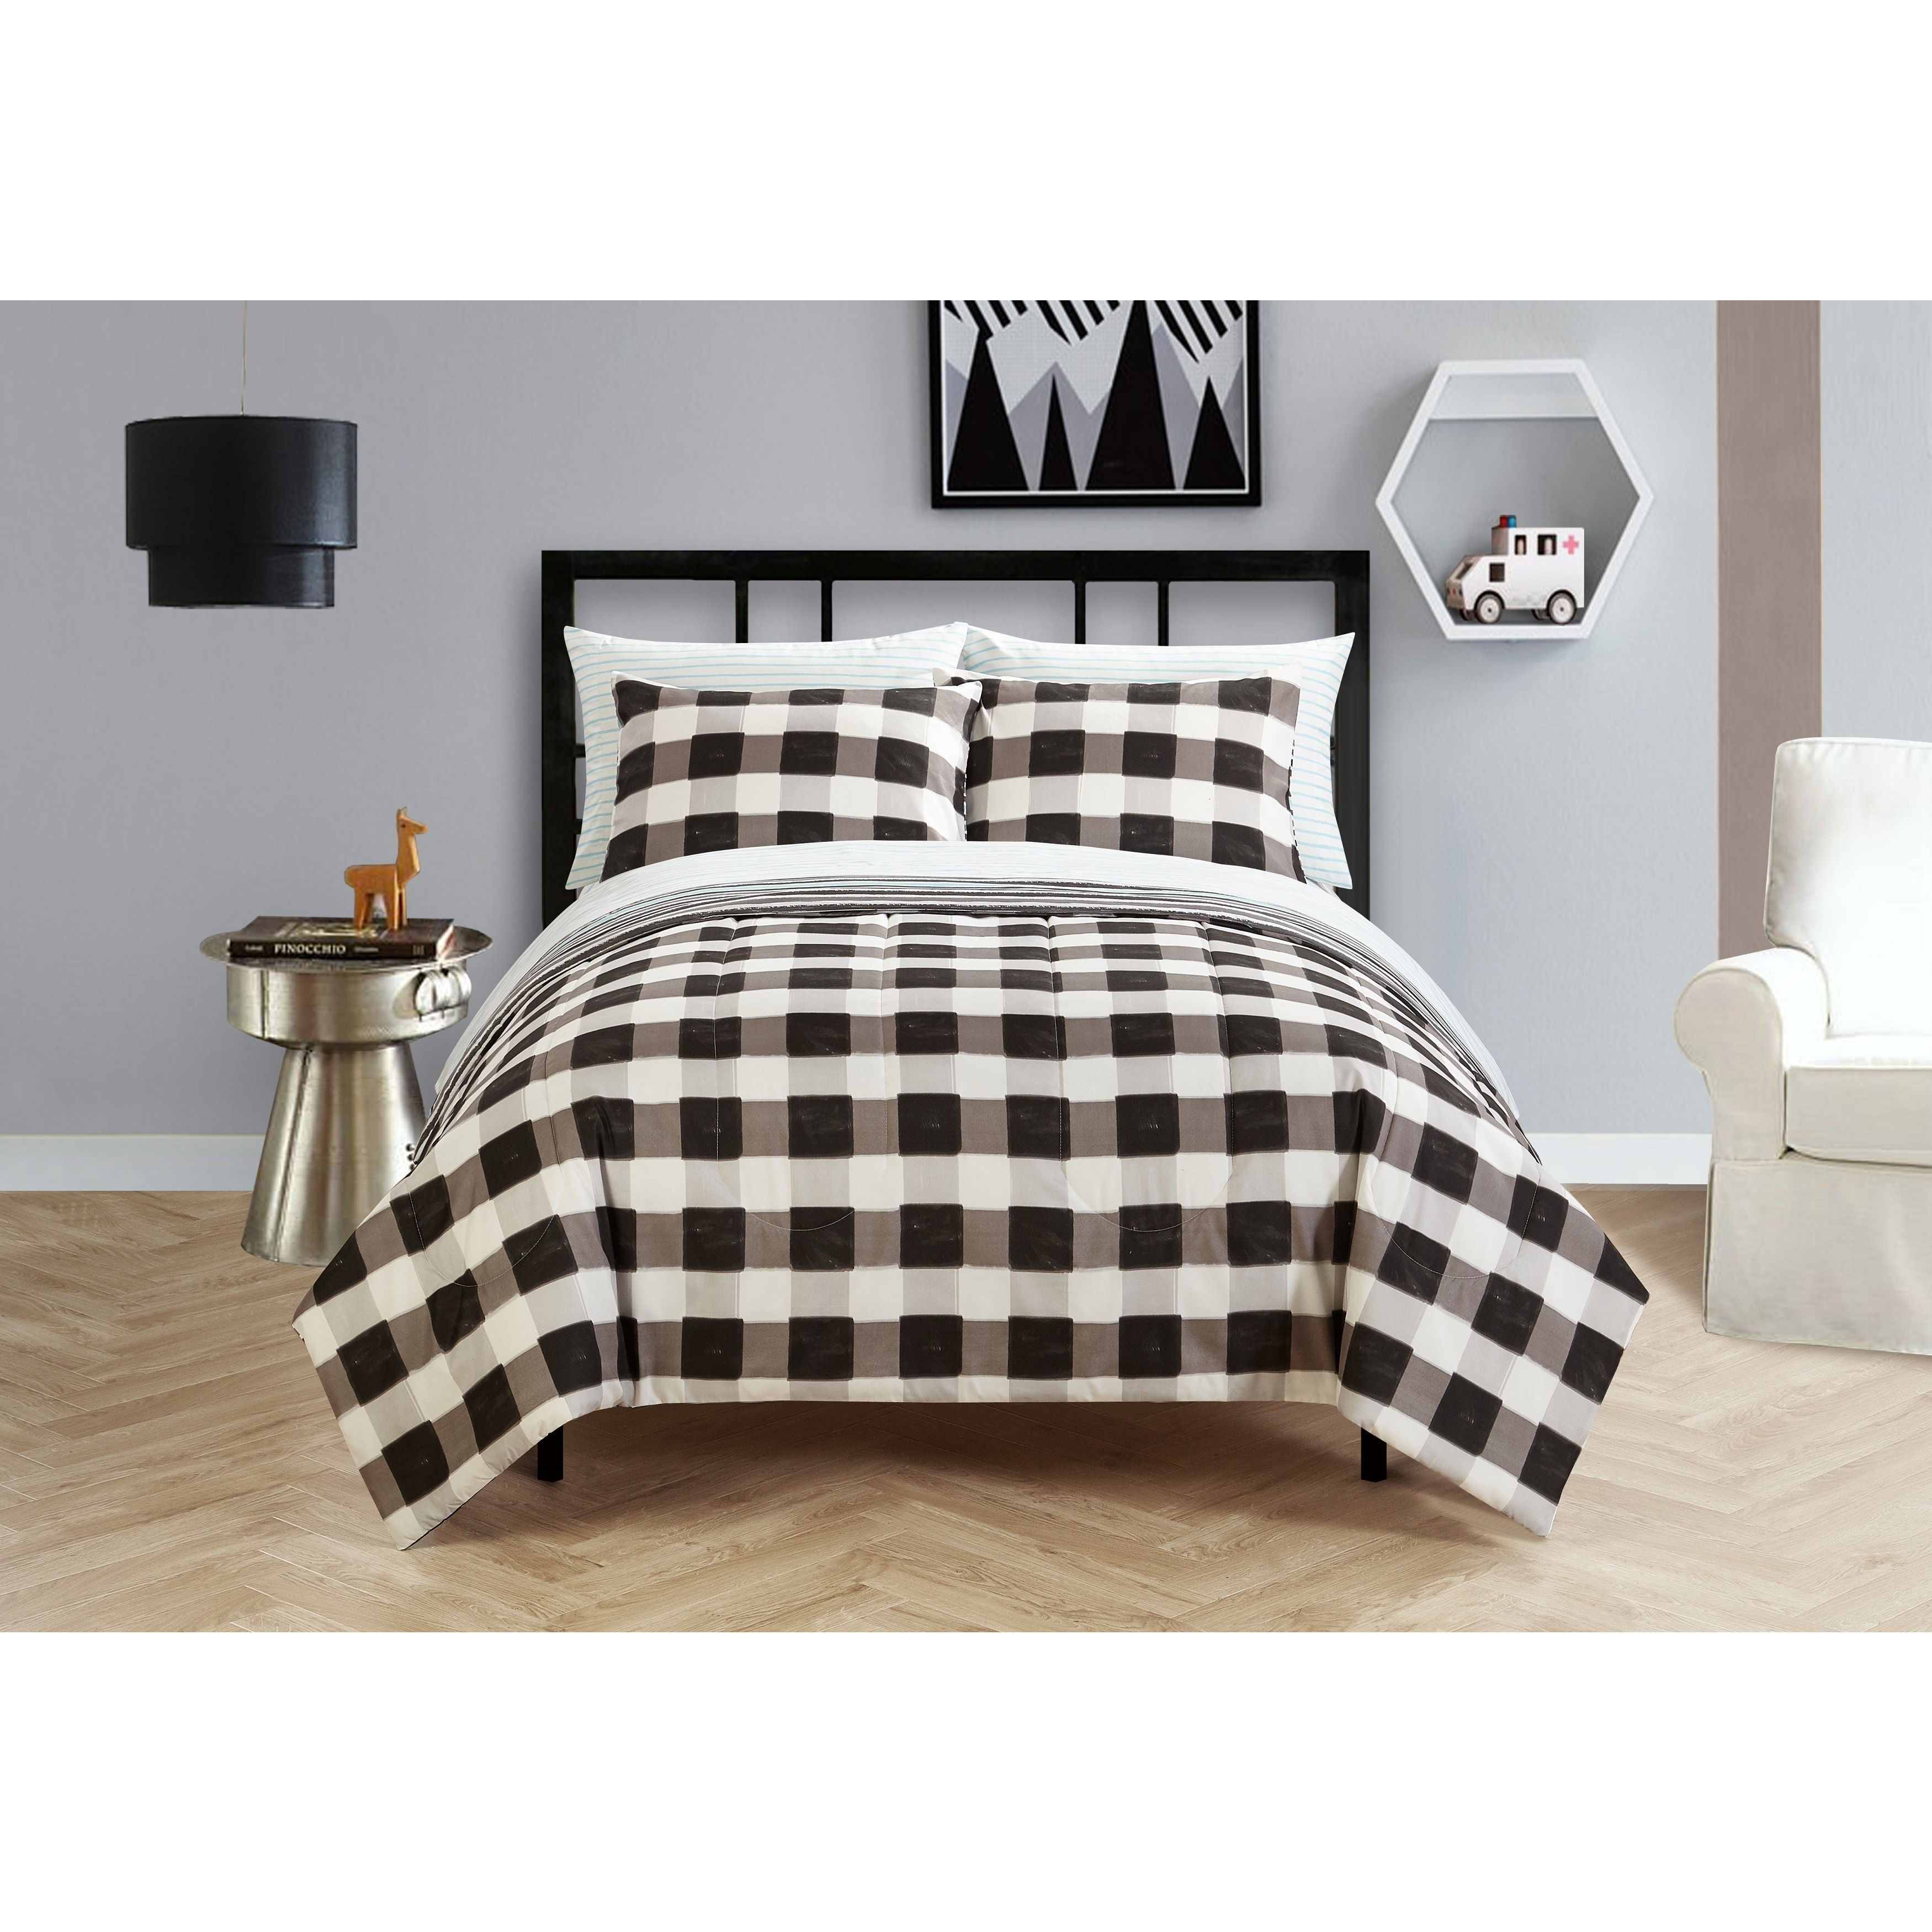 Shop Black And White Checkered Bed In A Bag Overstock 16849534